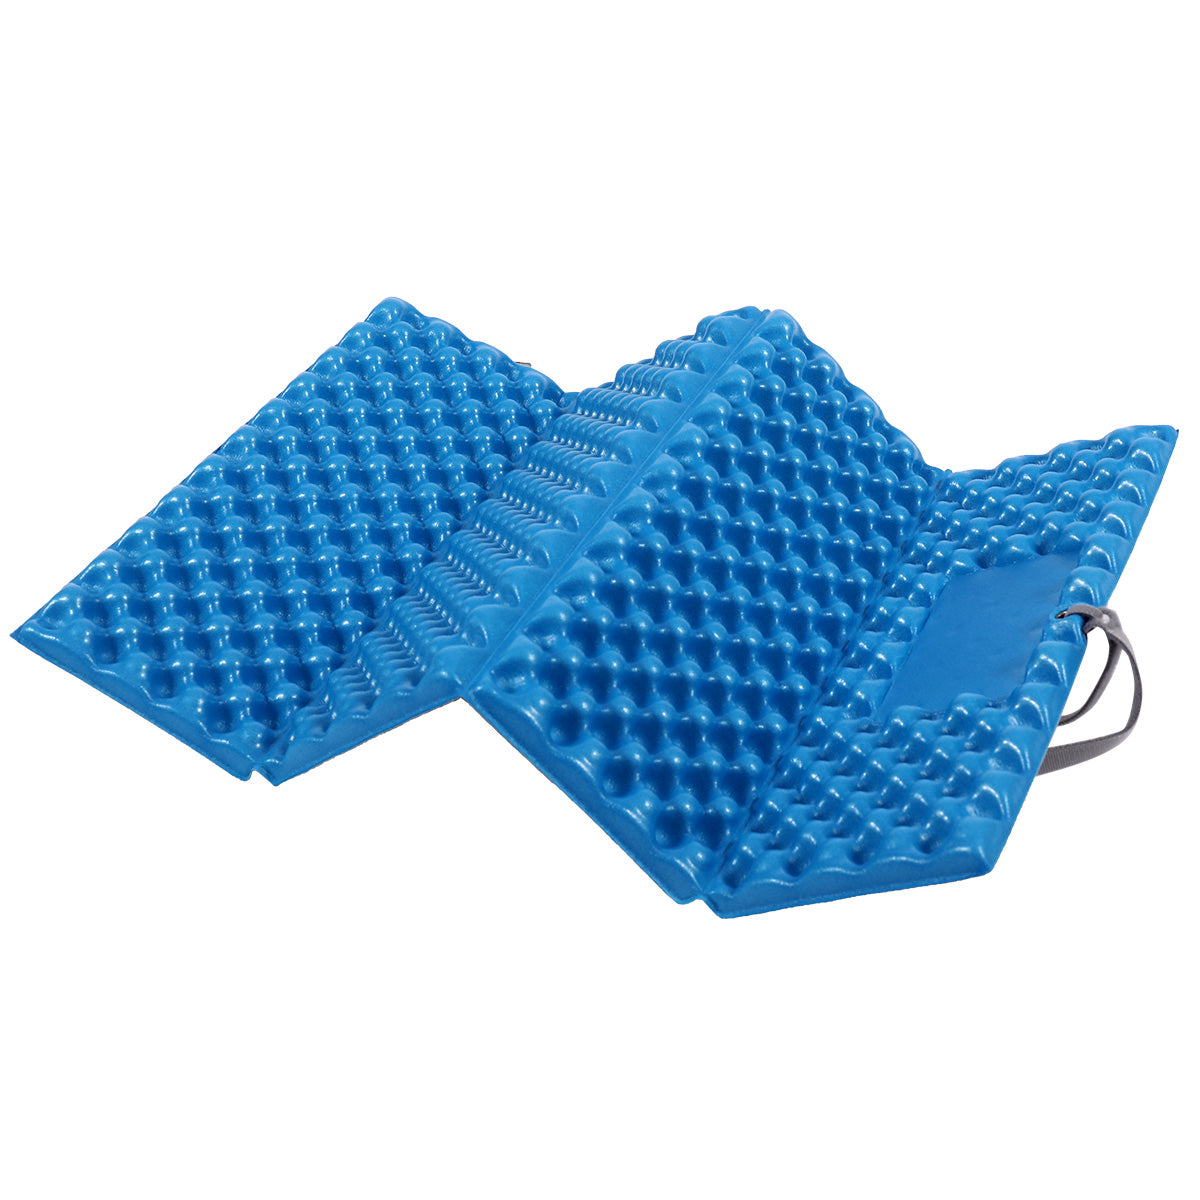 REDCAMP Foam Hiking Seat Pad, 1/2/4PCS Foldable Z Ultralight Sitting Pad  for Camping Backpacking Stadium Outdoor, Green/Blue/Khaki